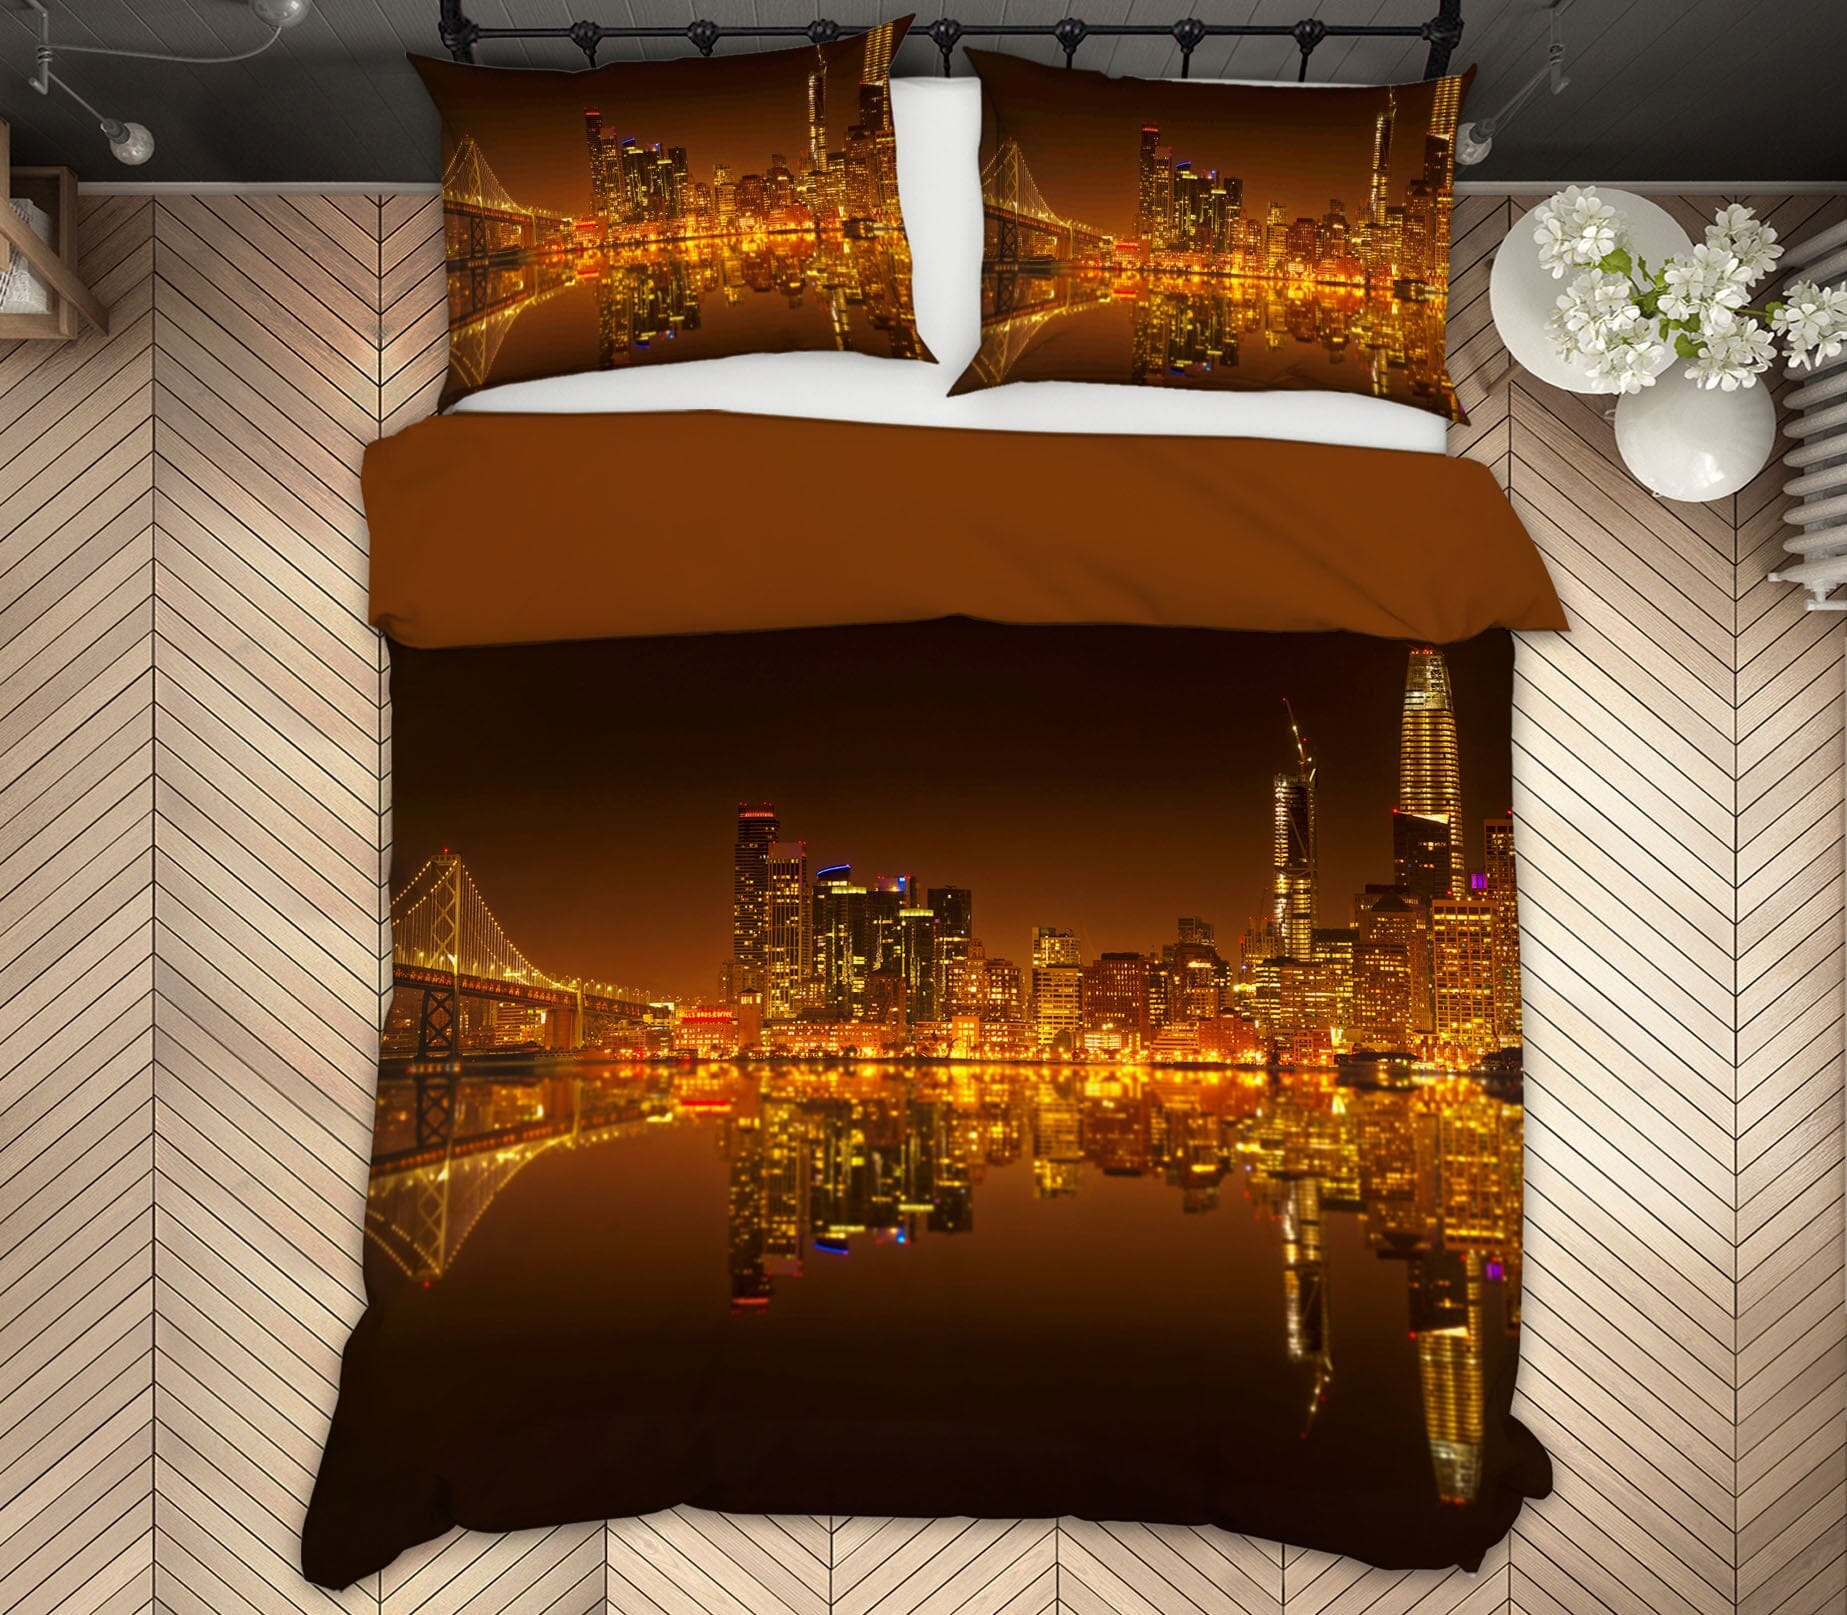 3D Canal Lights 2110 Marco Carmassi Bedding Bed Pillowcases Quilt Quiet Covers AJ Creativity Home 